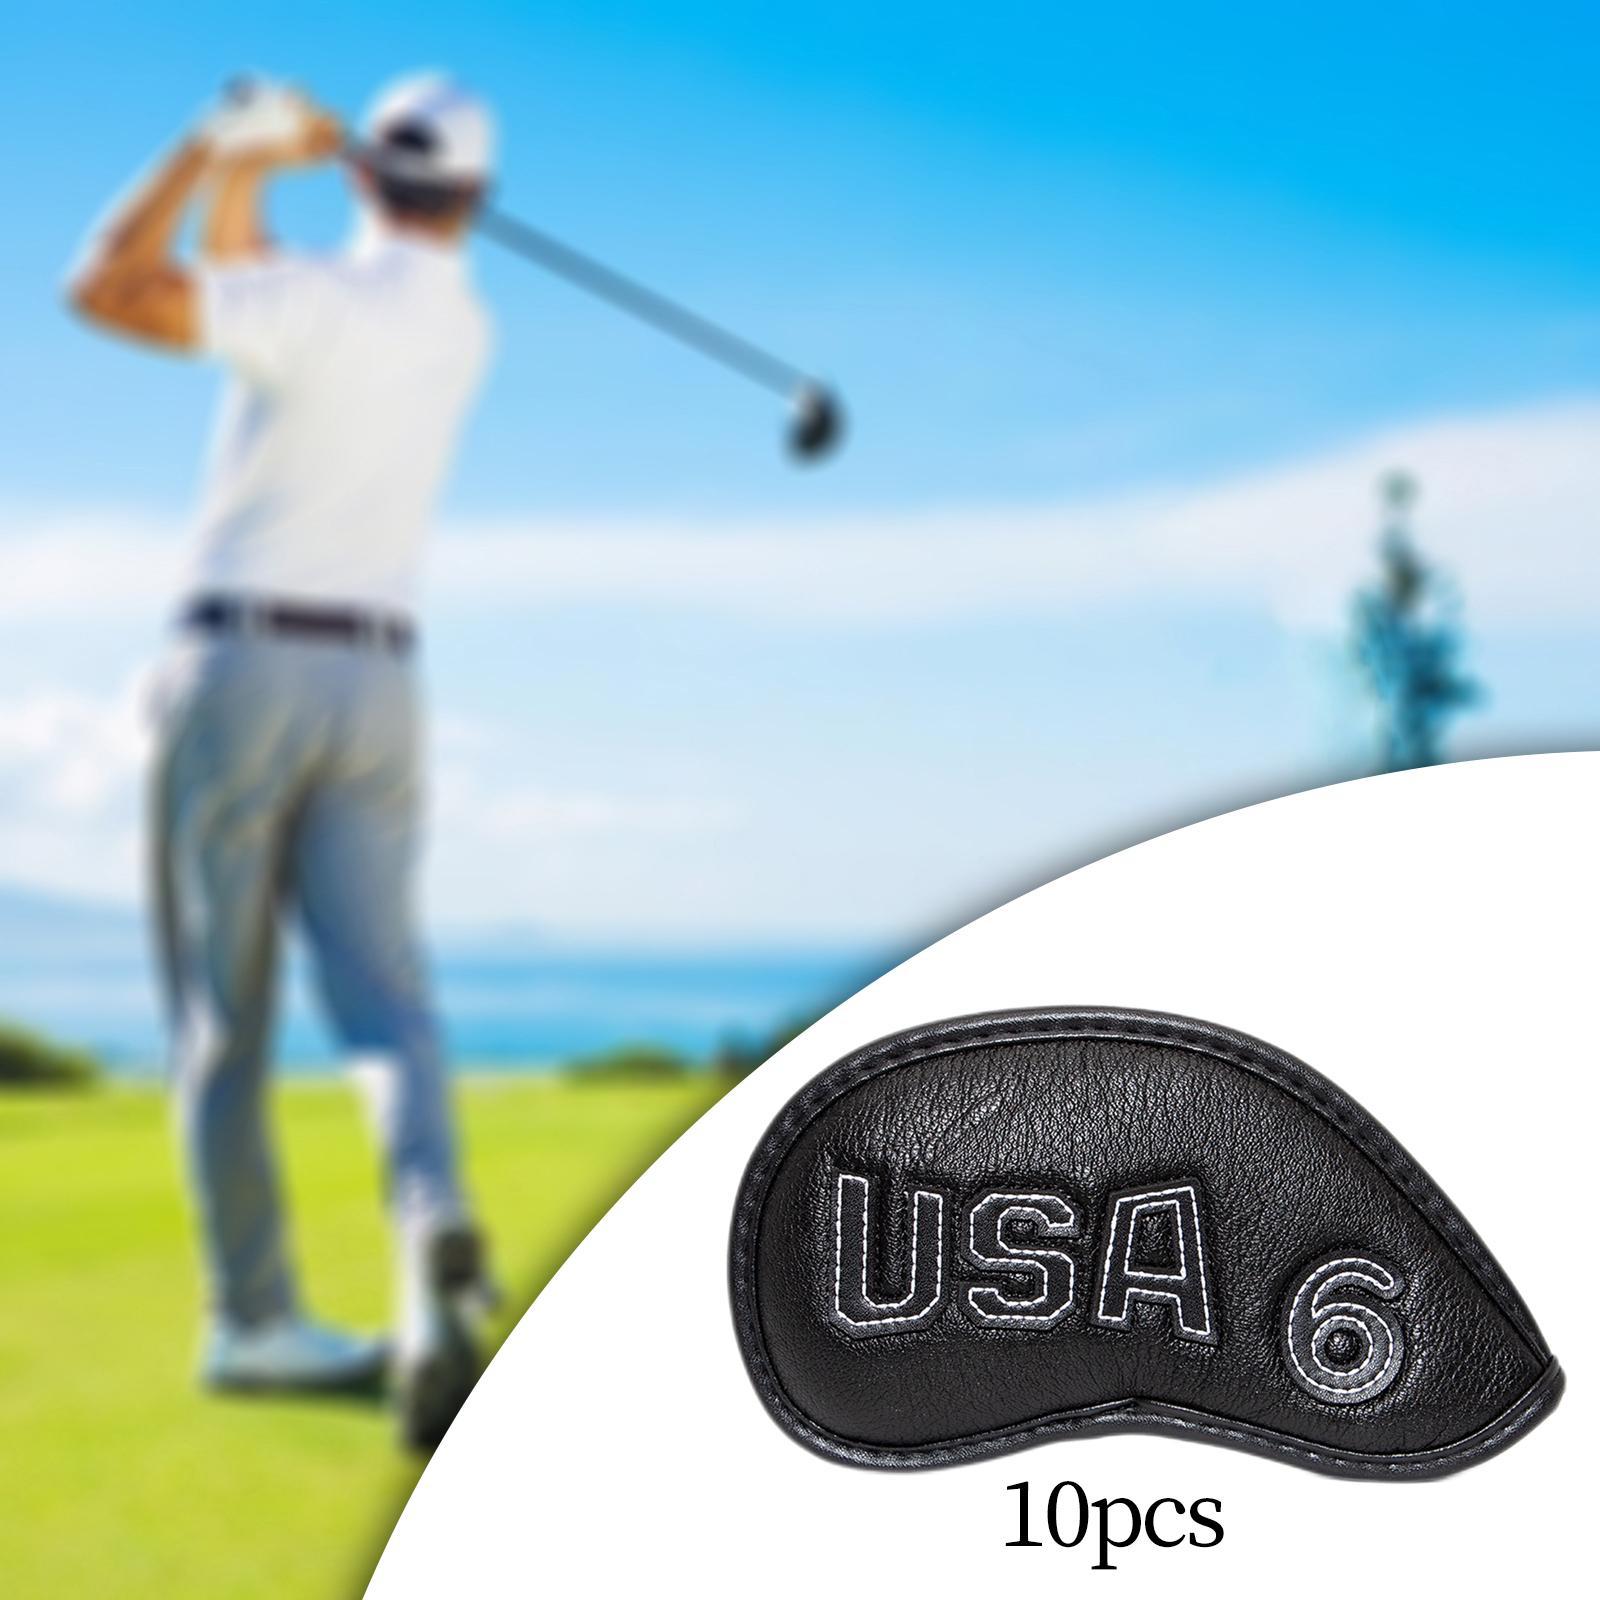 10x Golf Iron Headcover Club Head Covers Fits All Brands, PU Leather Club Covers with Big Number, Guard Waterproof Case Protection Wrap